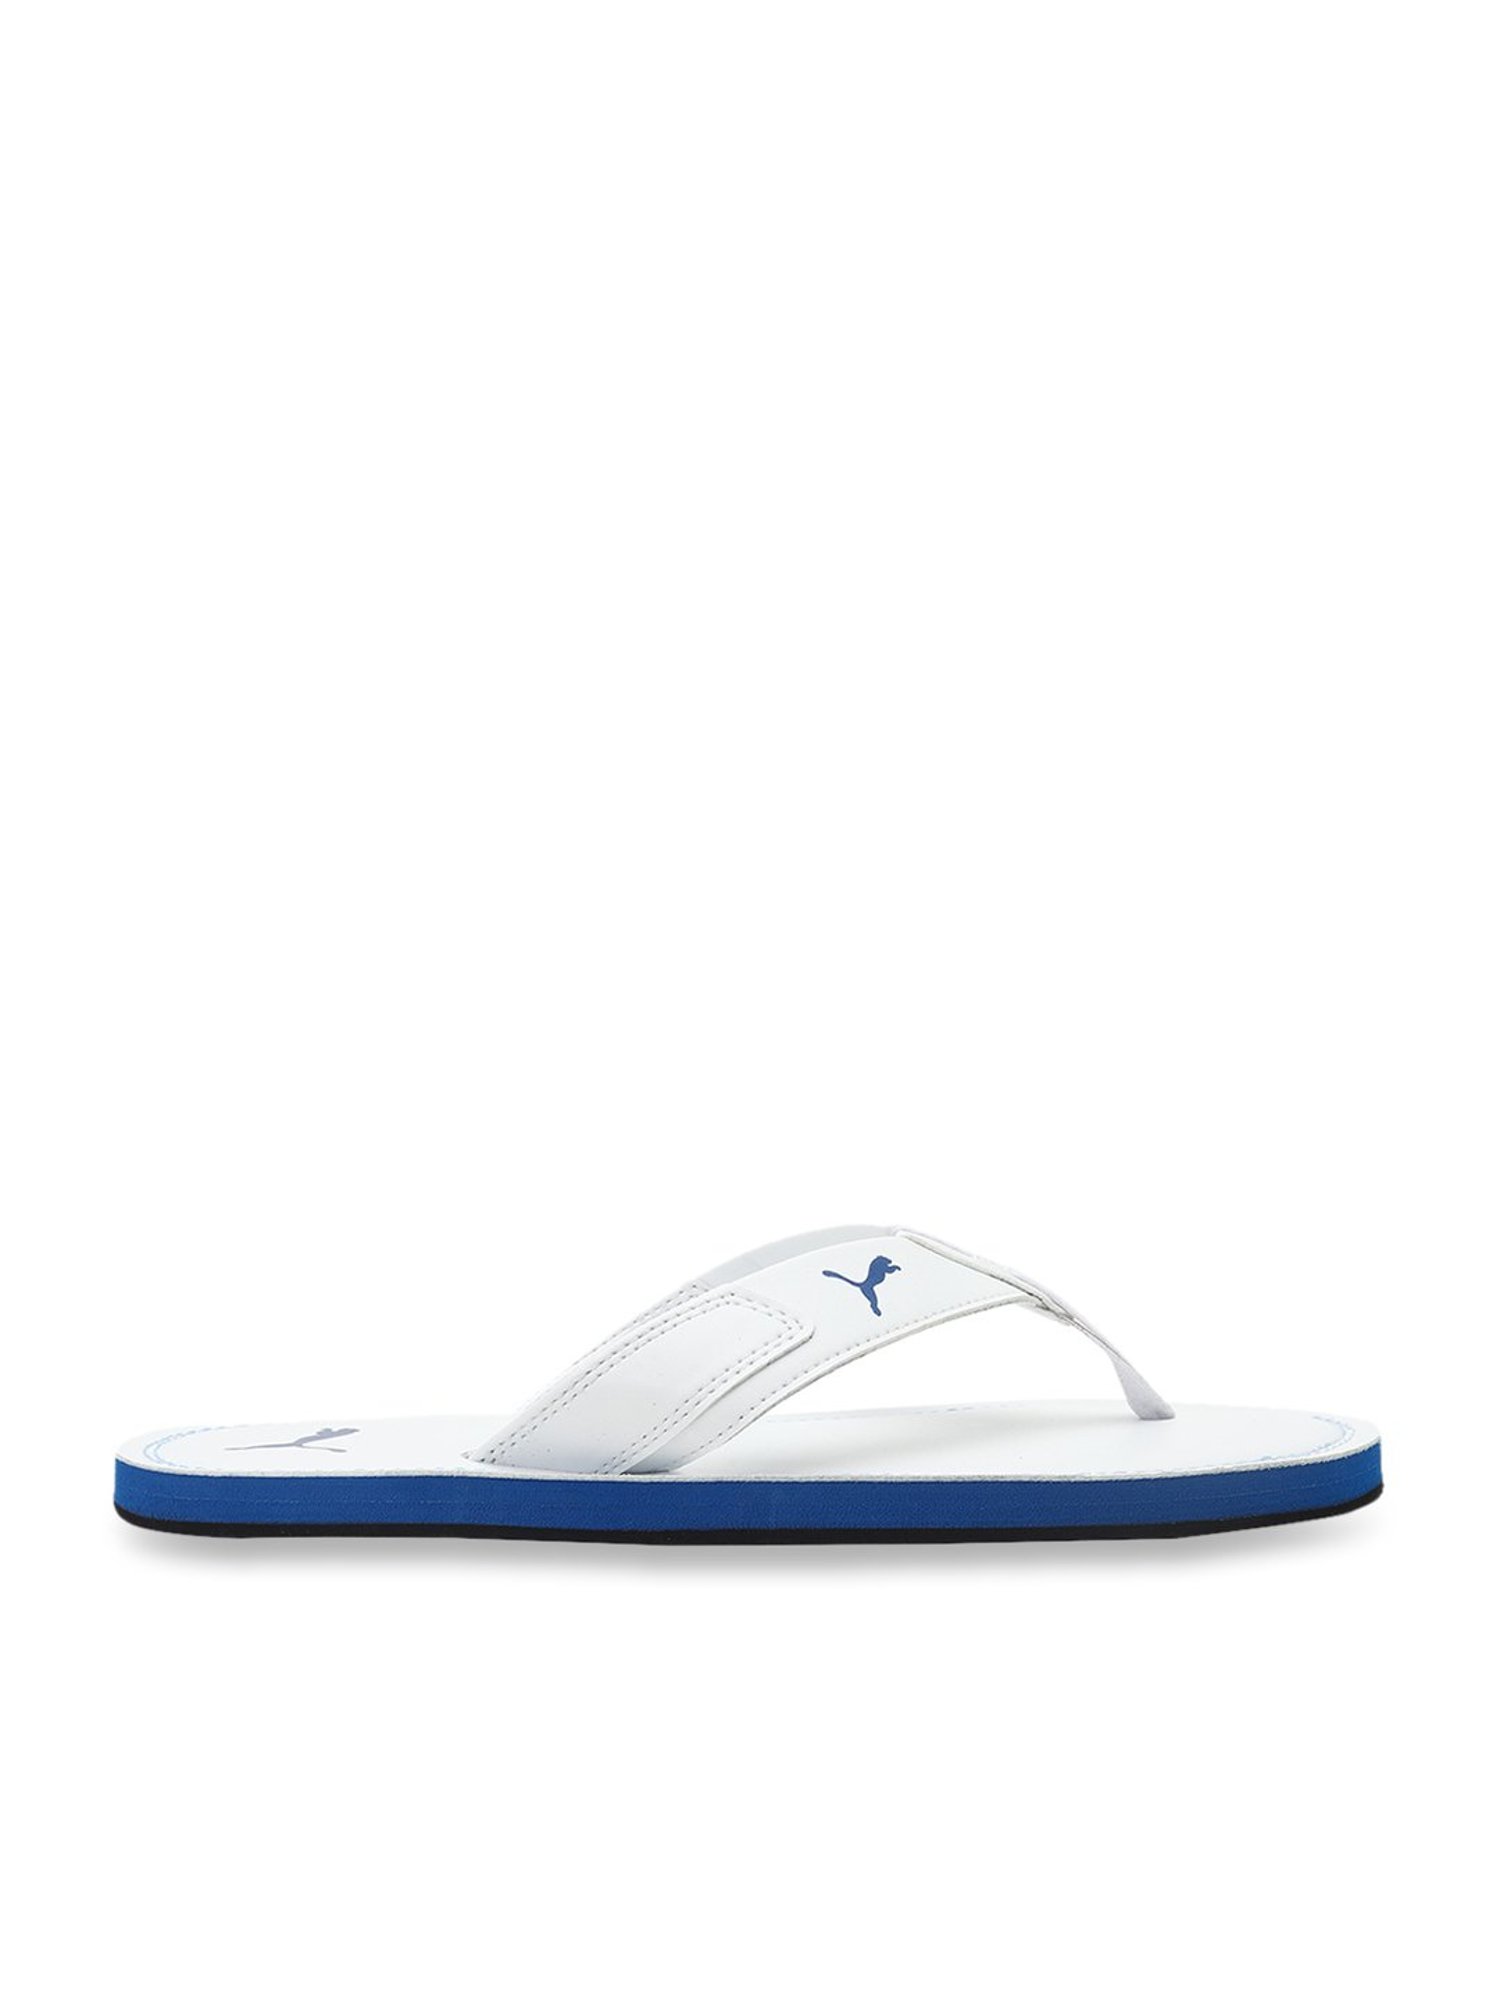 Buy Puma Men's Stark One8 Slipper Online at Low Prices in India -  Paytmmall.com